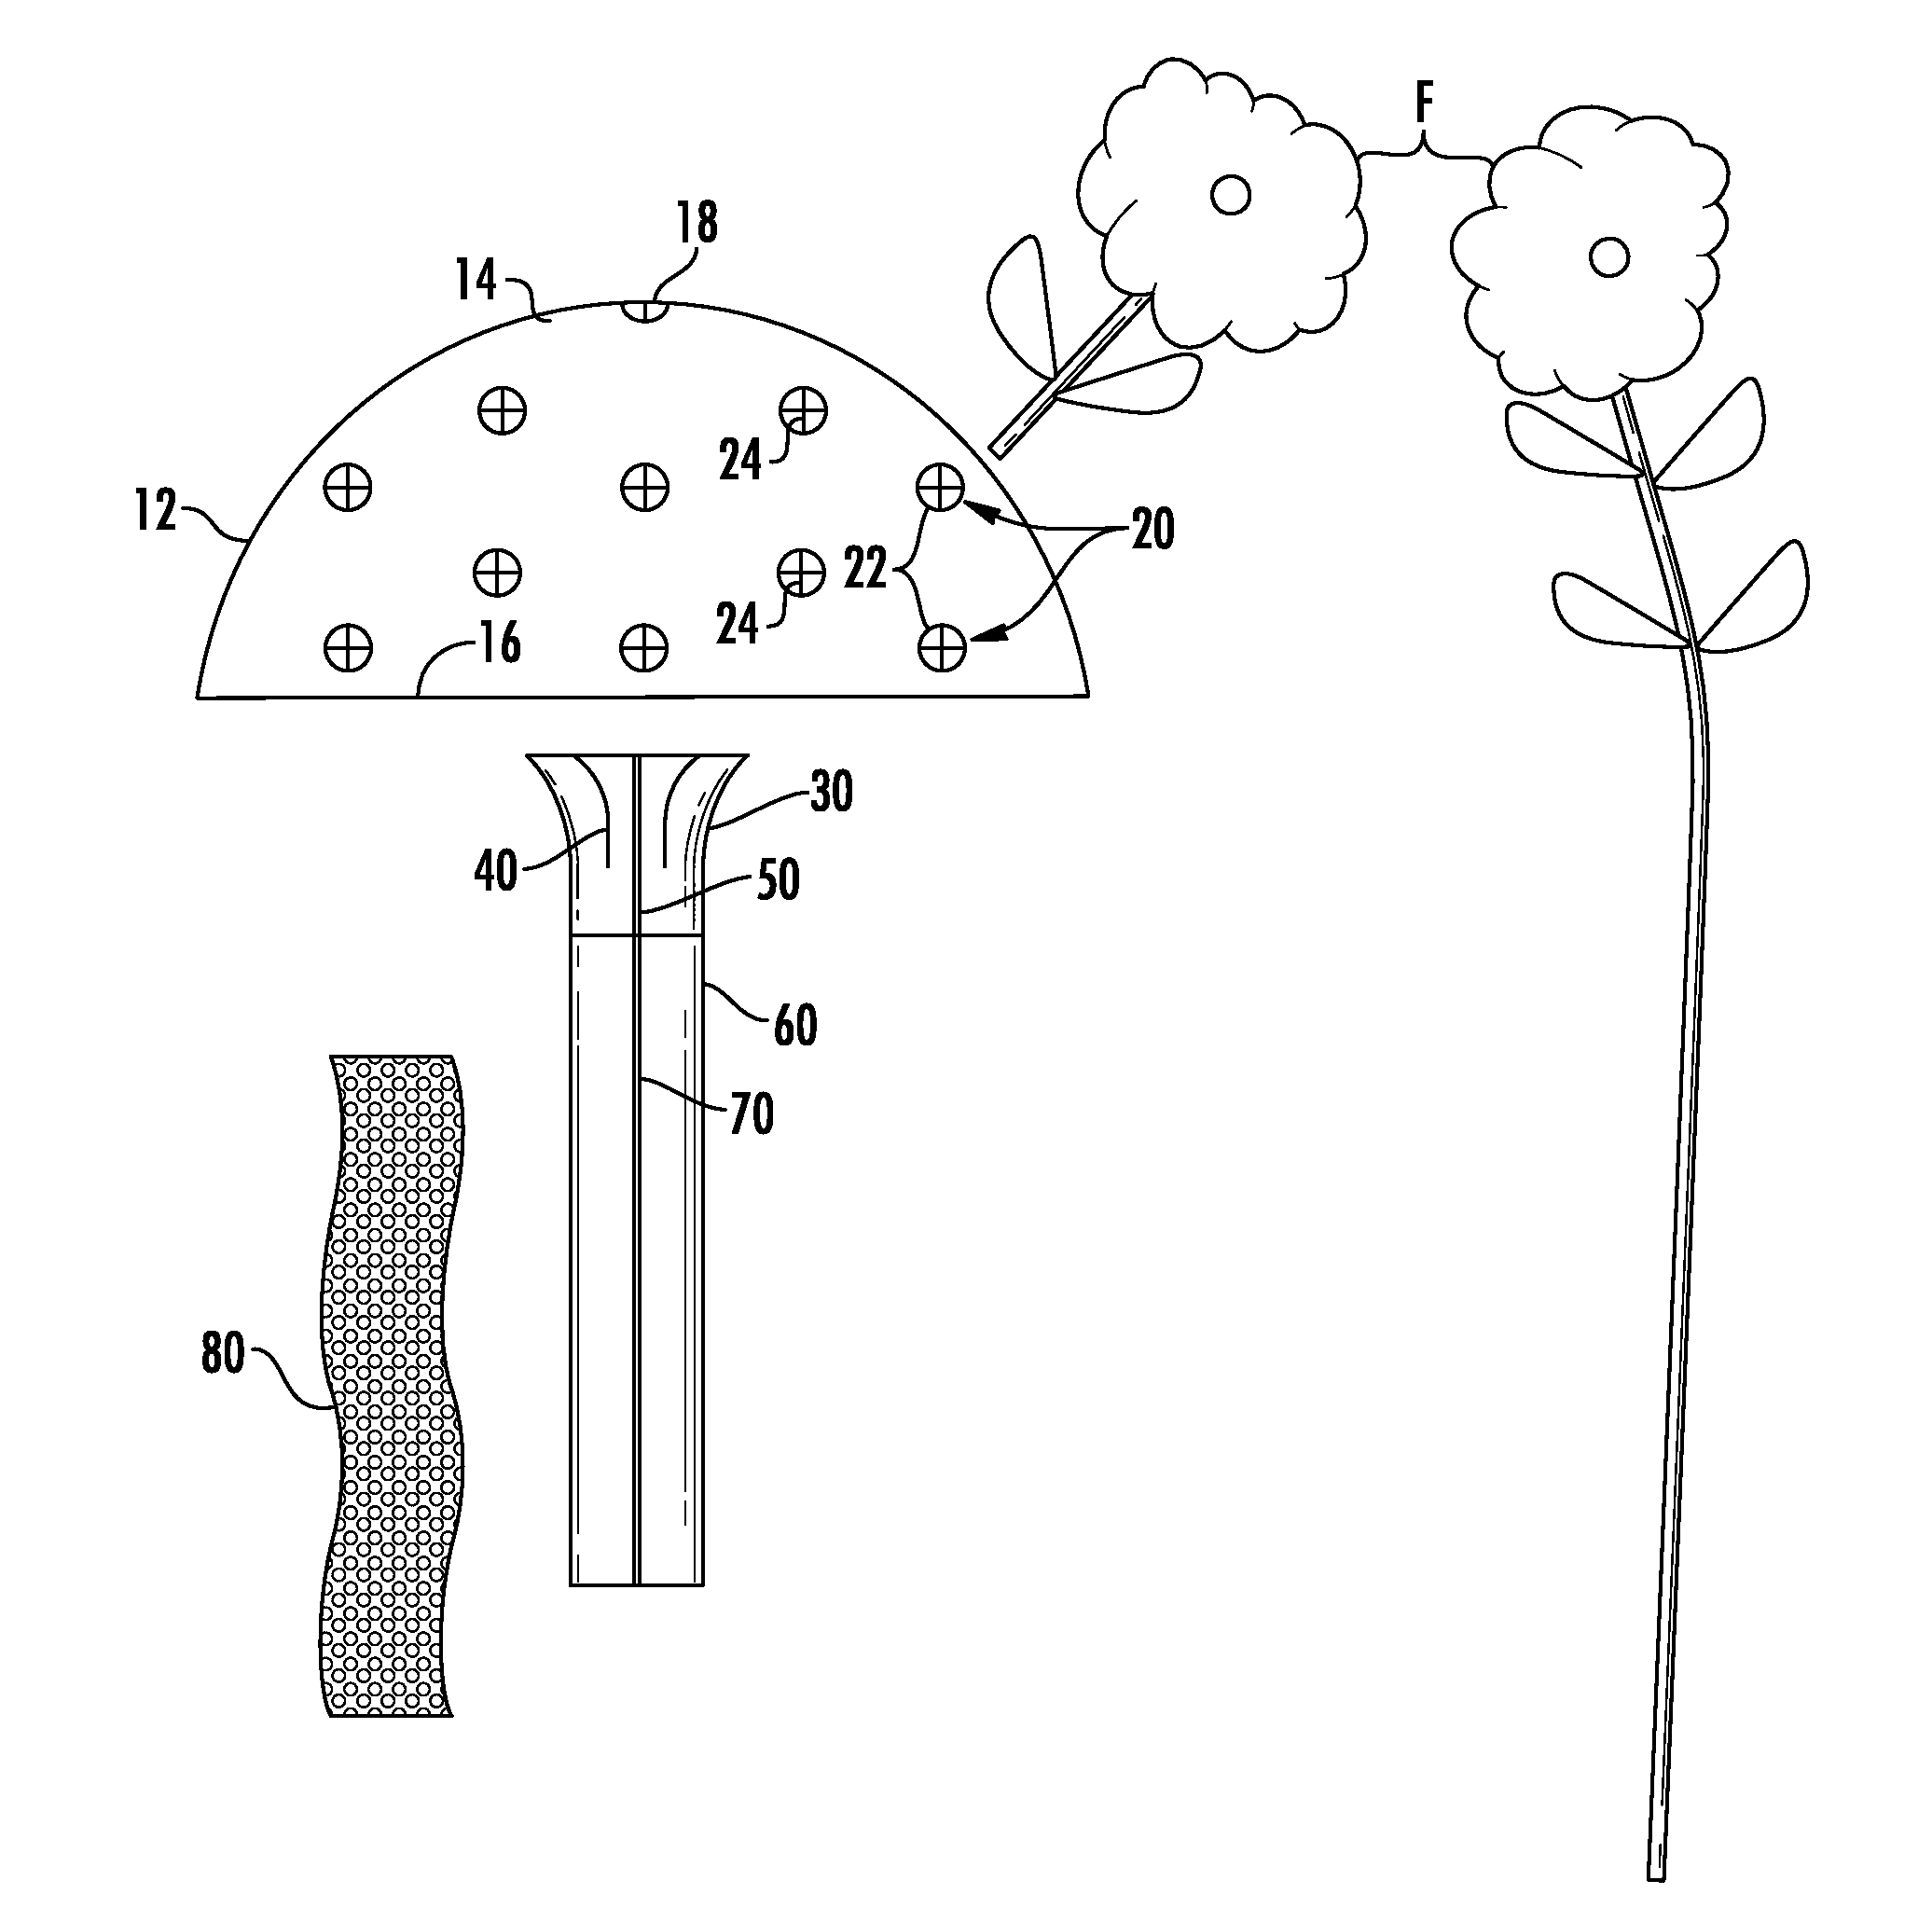 Bouquet Holder Apparatus and Method of Use